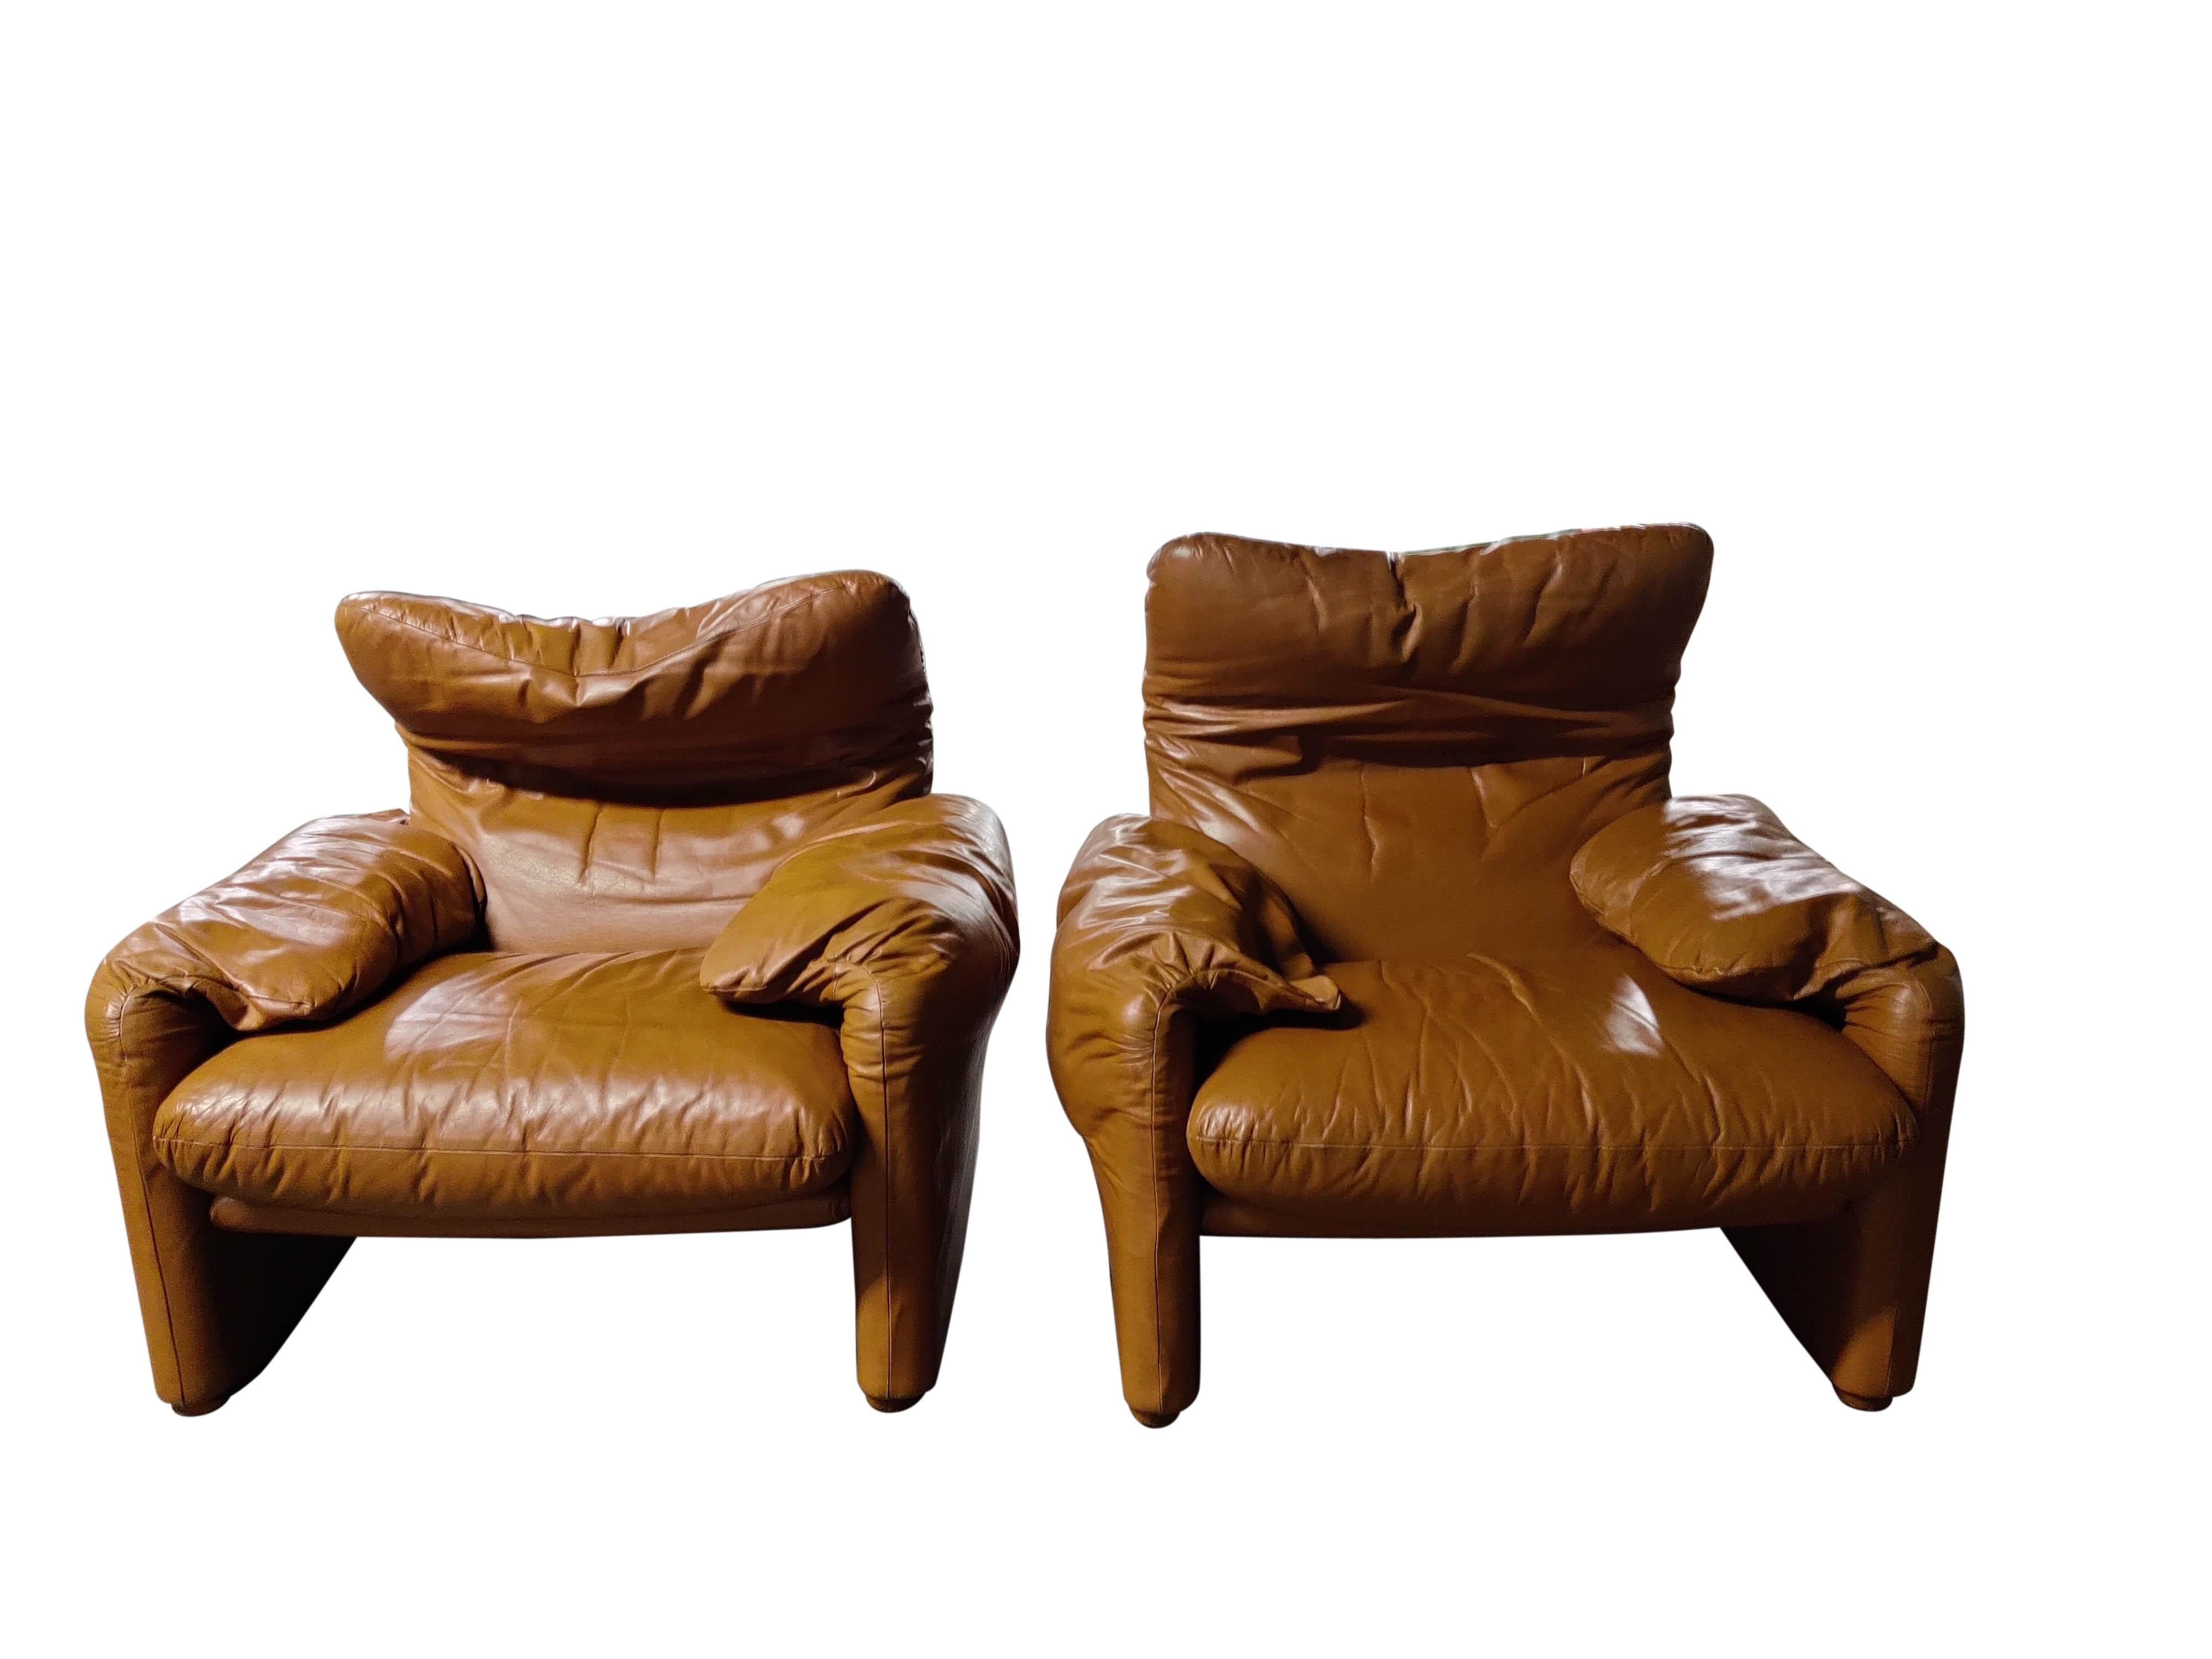 Mid-Century Modern Leather Maralunga Armchairs by Vico Magistretti for Cassina, 1973, Set of 2